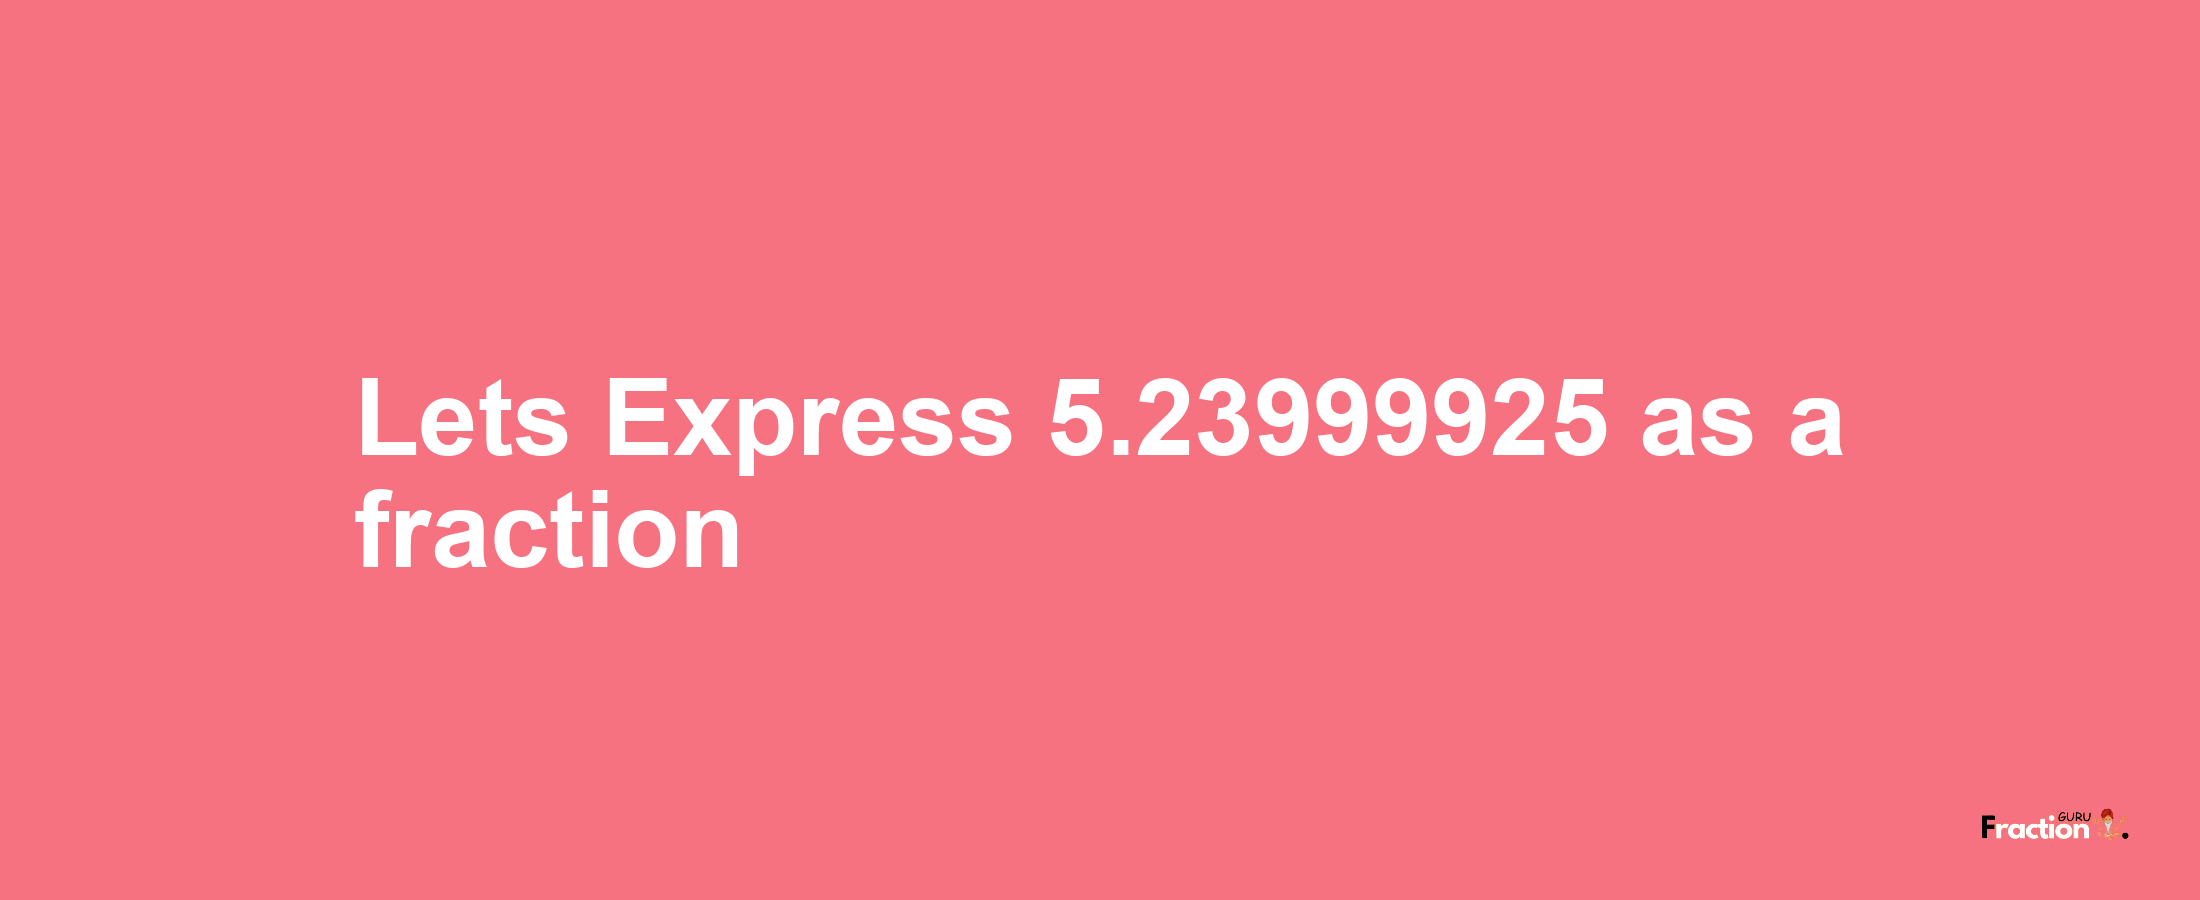 Lets Express 5.23999925 as afraction